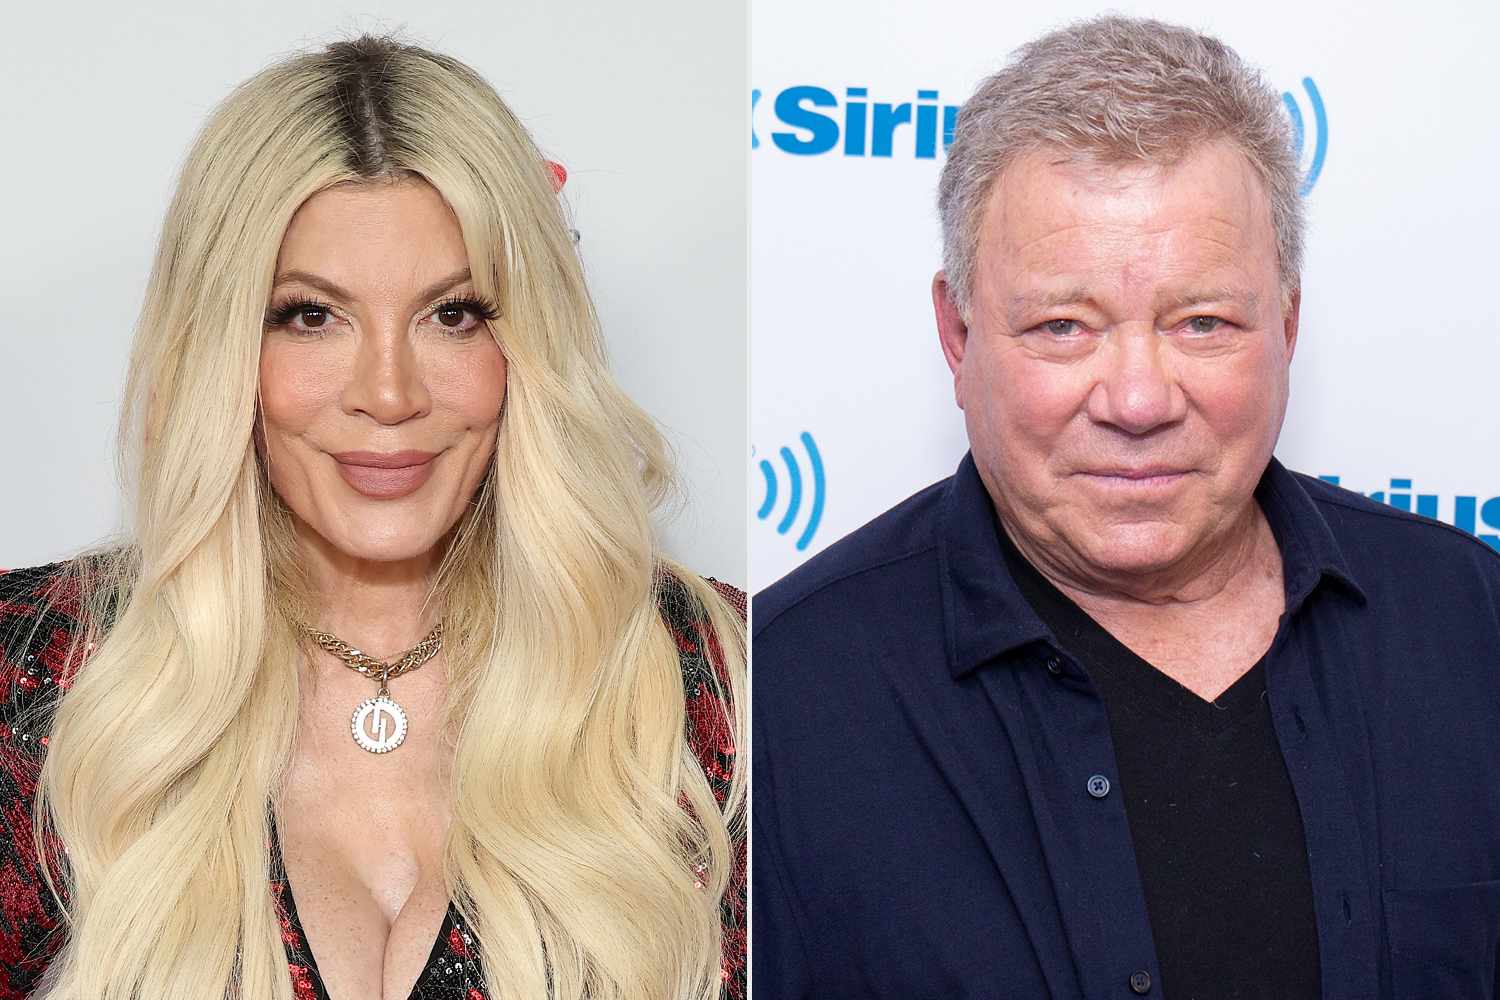 Tori Spelling Has NSFW Conversation with William Shatner About Sex, Orgasms and OnlyFans